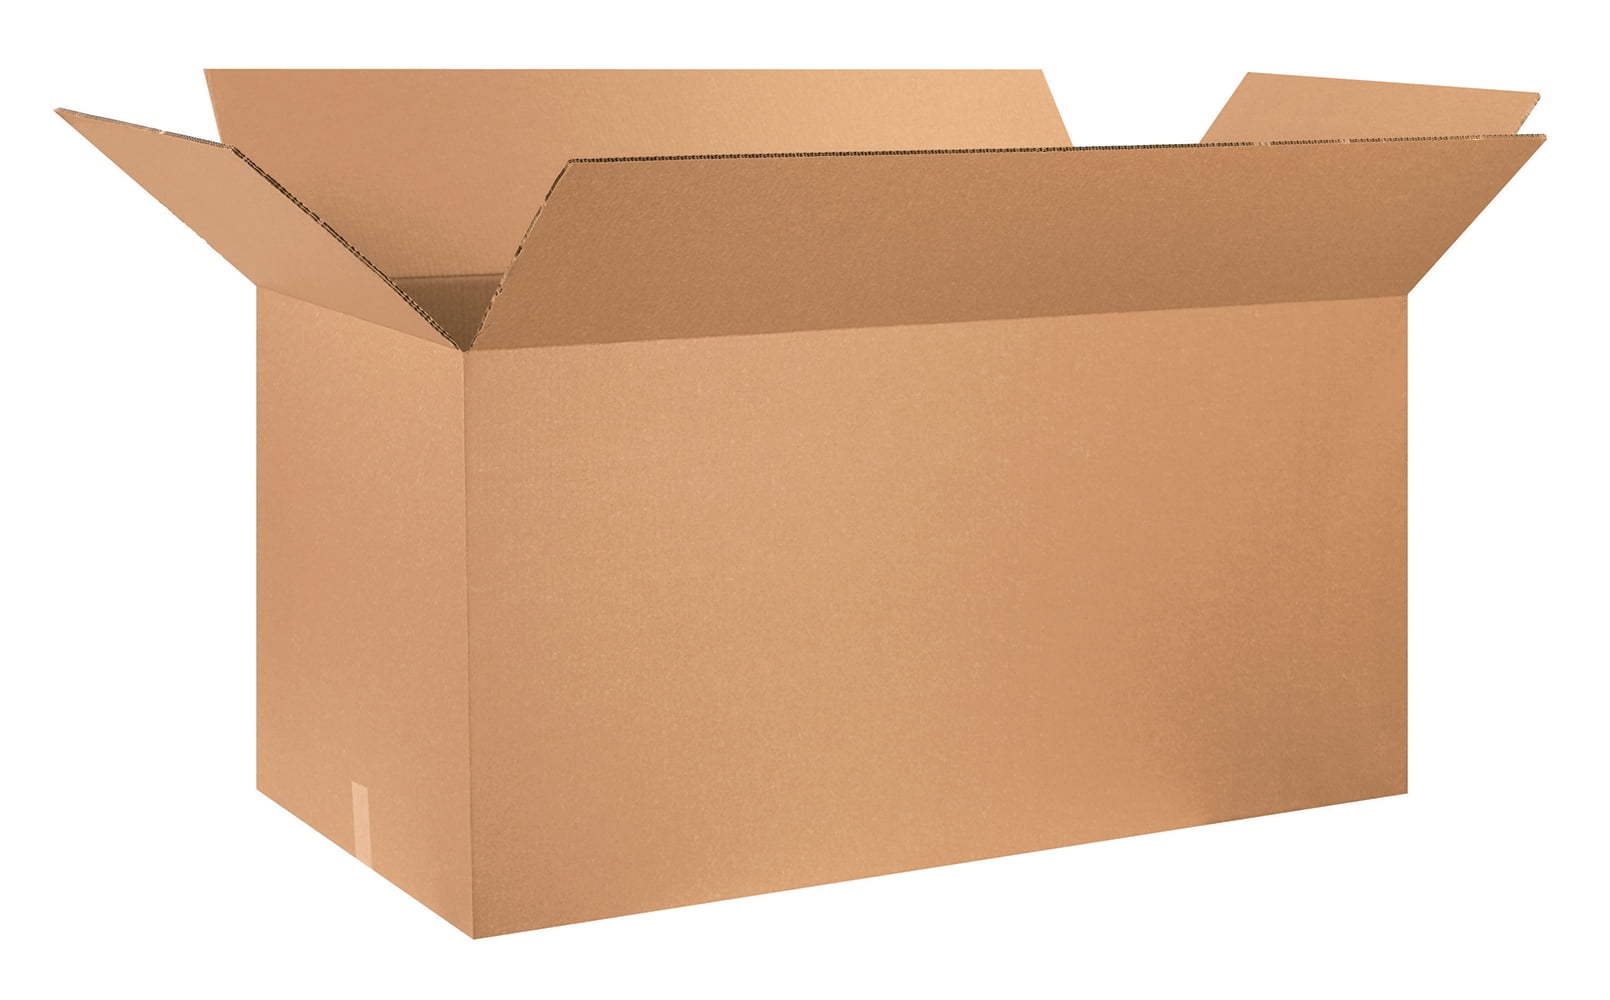 10 x Strong DOUBLE WALL Cardboard Boxes 30x18x18" Storage/Moving/Removals 